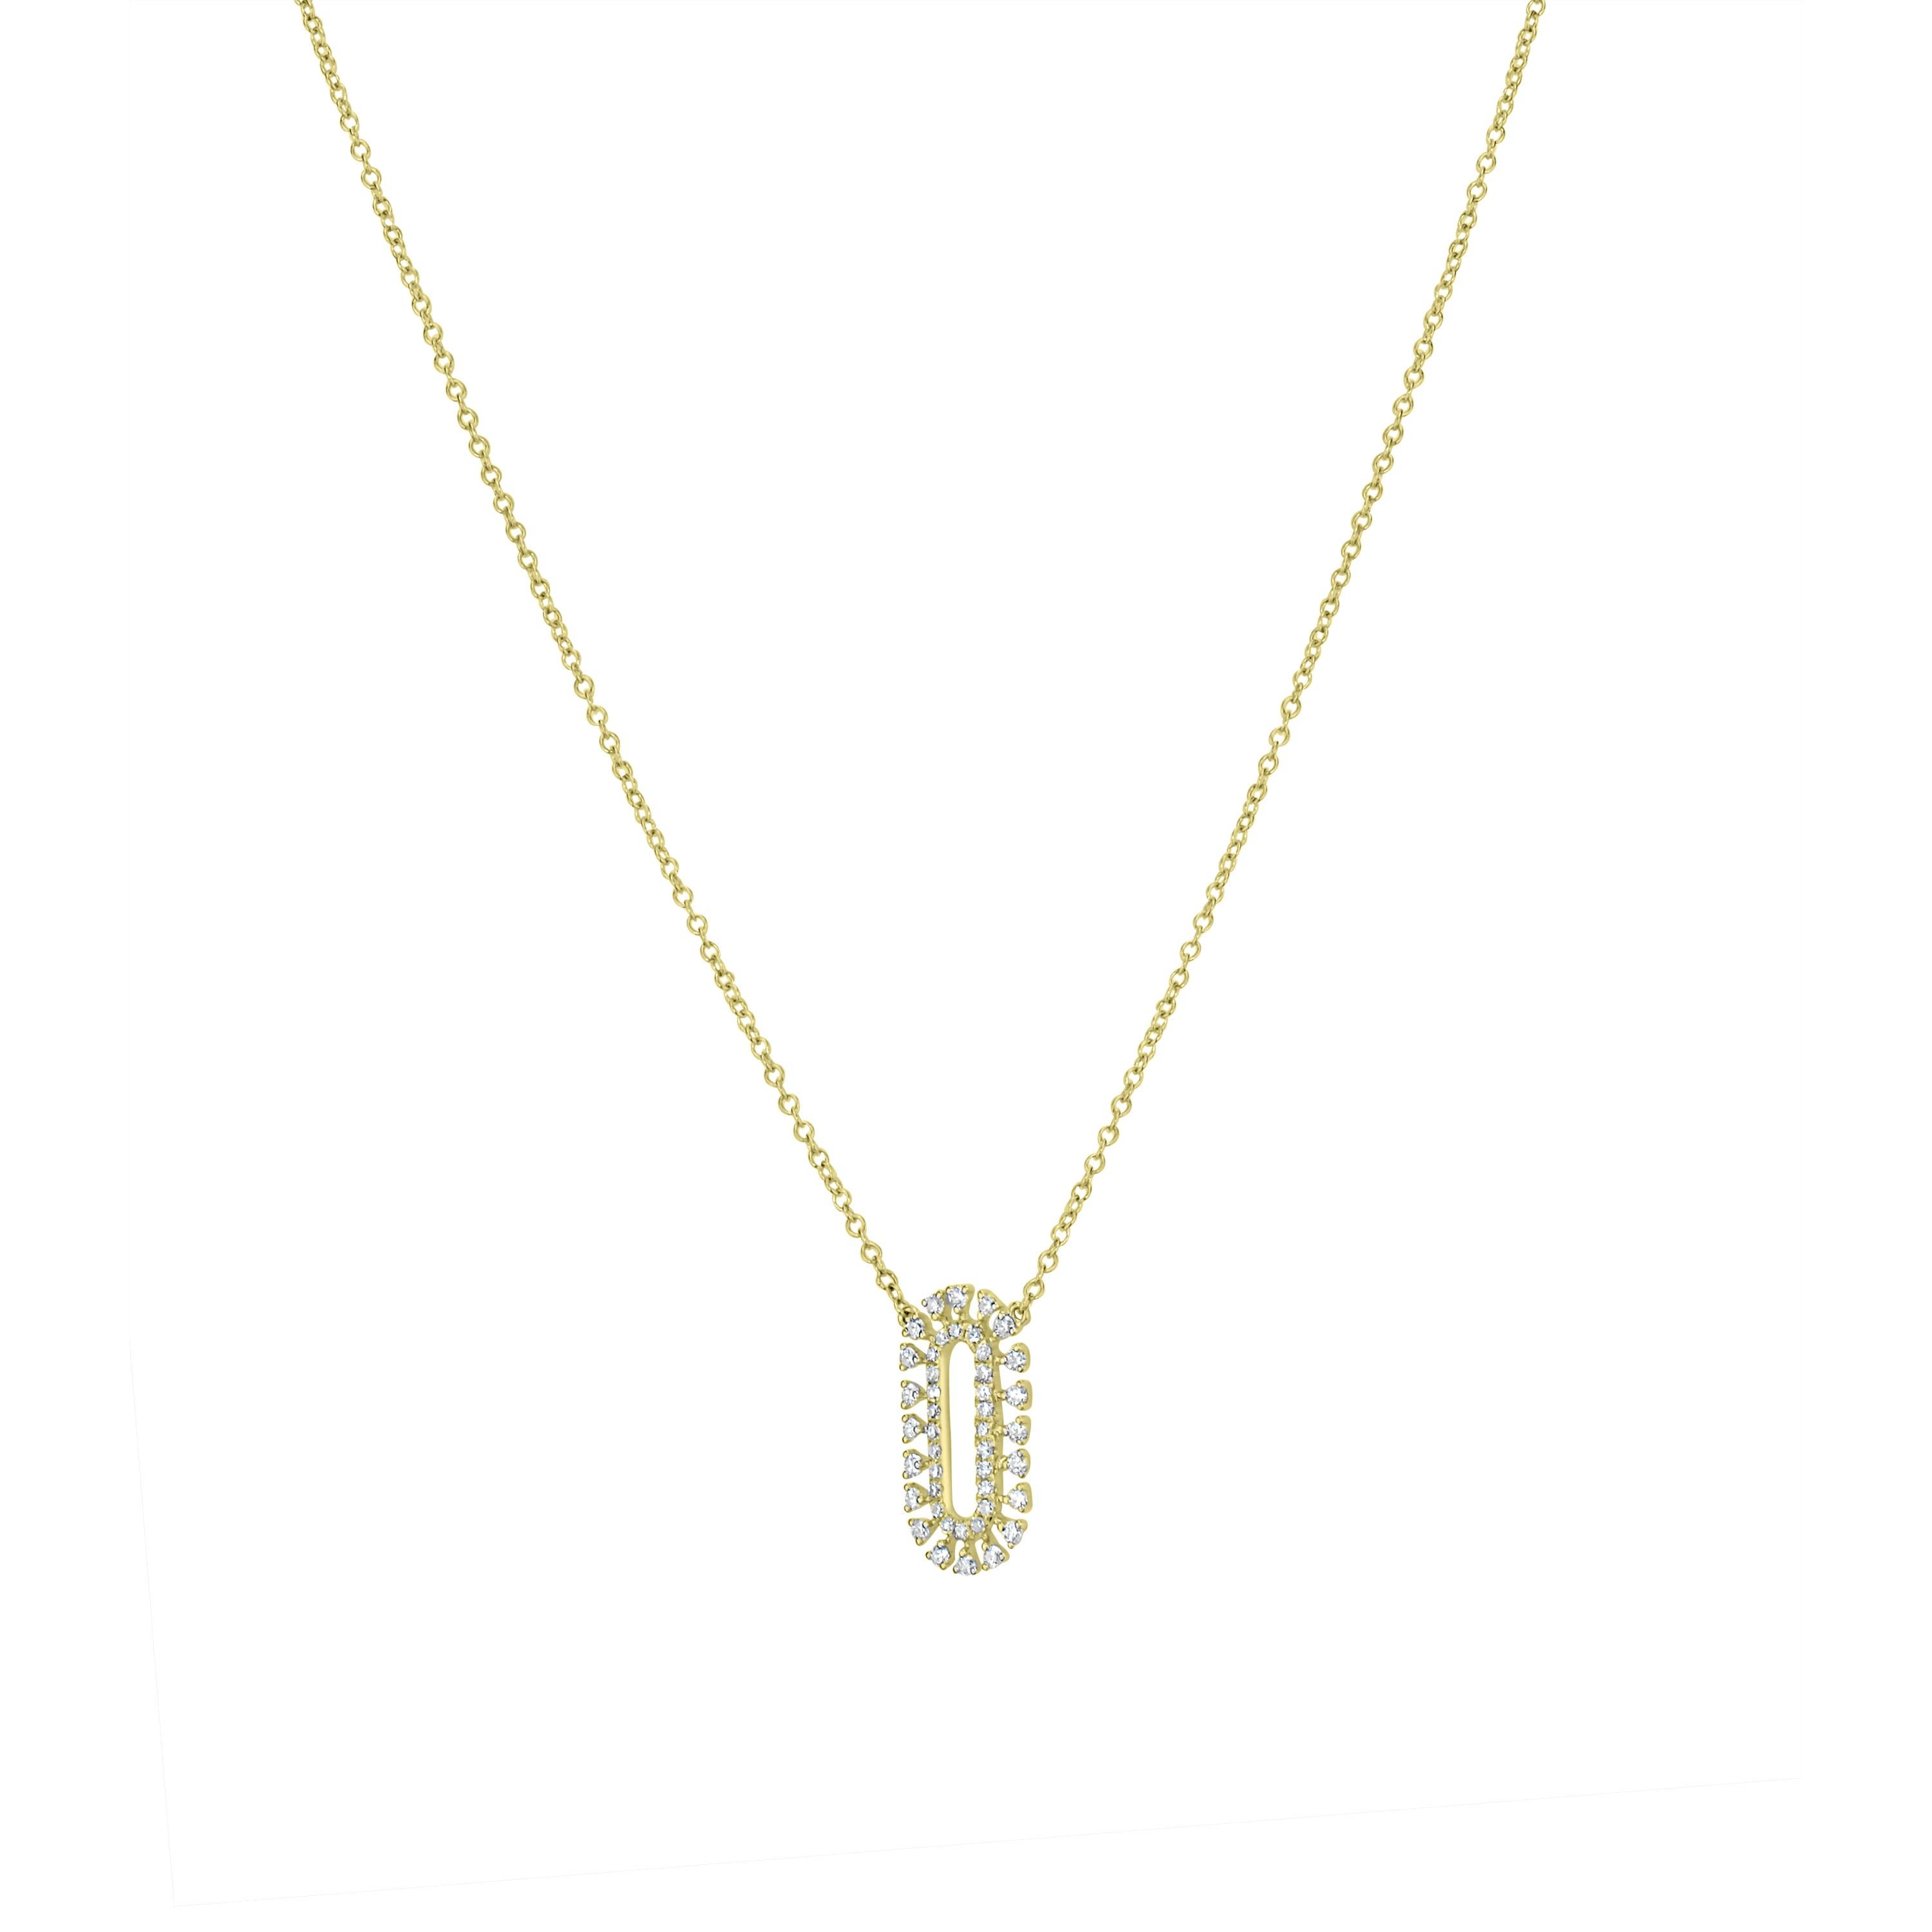 Freshen up your looks with this delicate necklace featuring an openwork oval pendant embellished with pave set diamonds suspended from a cable chain of 18K yellow gold.

JEWELRY SPECIFICATION:
Approx. Metal Weight: 2.04 gram
Approx. Diamond Weight: